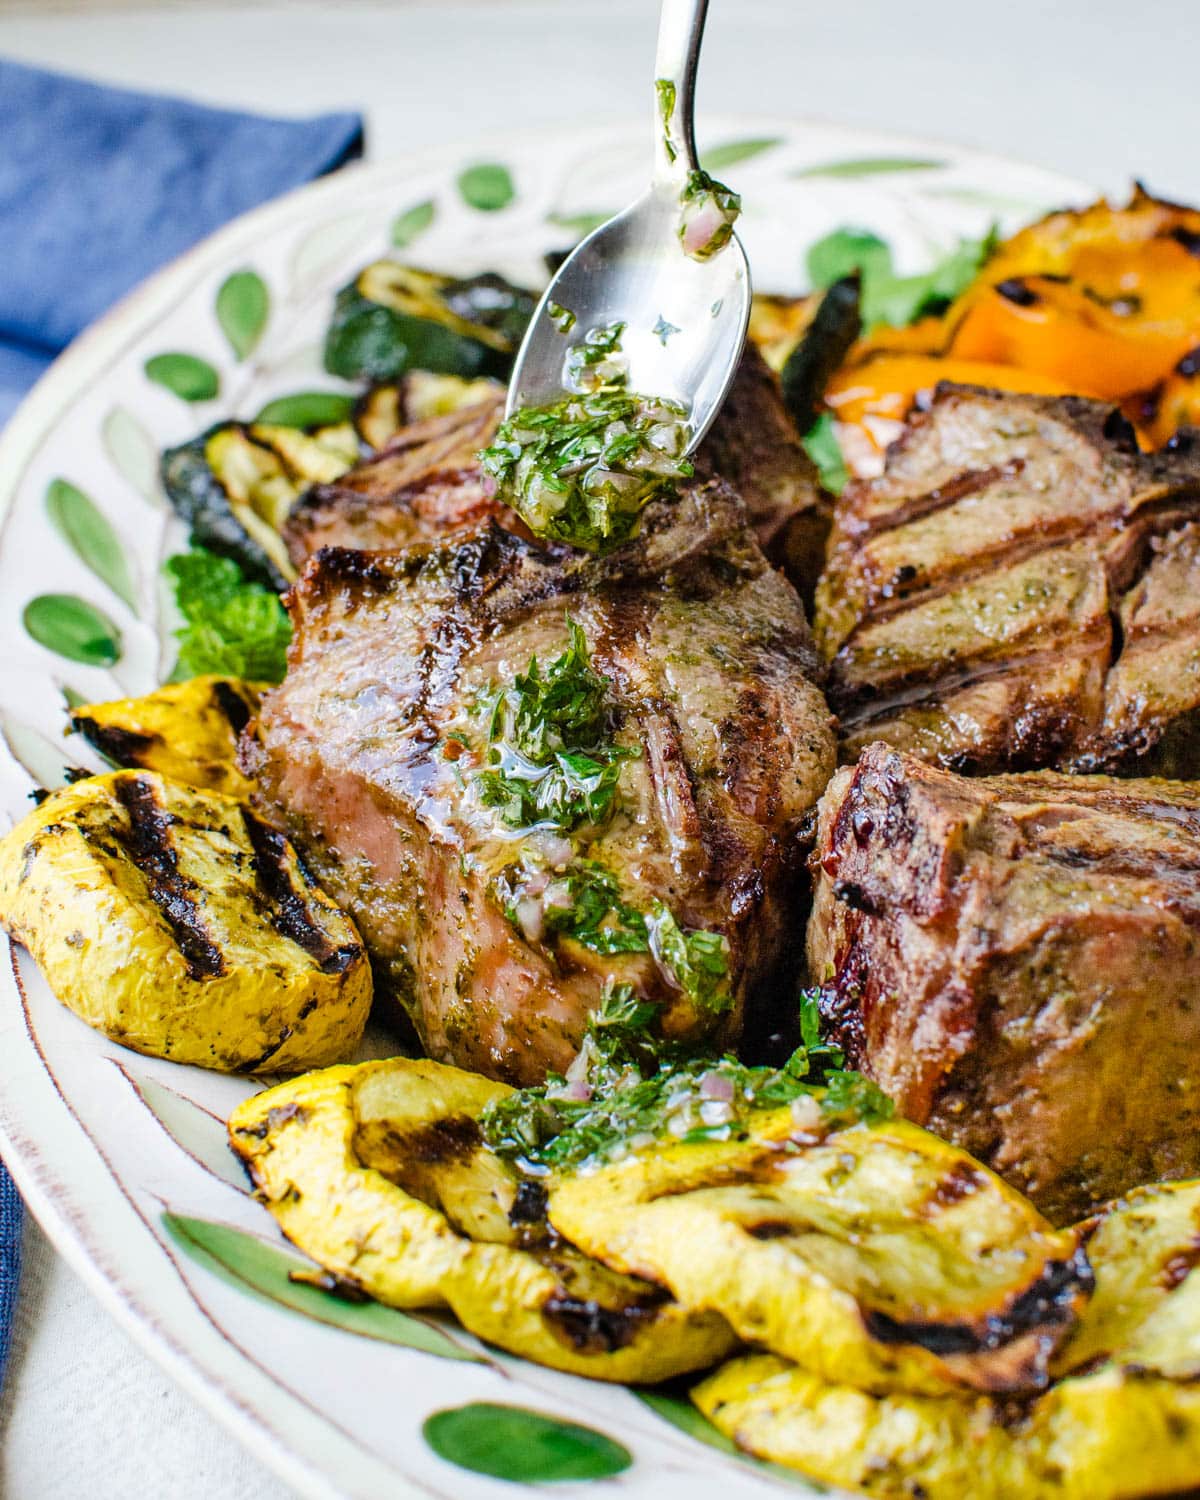 Serving lamb chops and grilled vegetables with mint chimichurri.